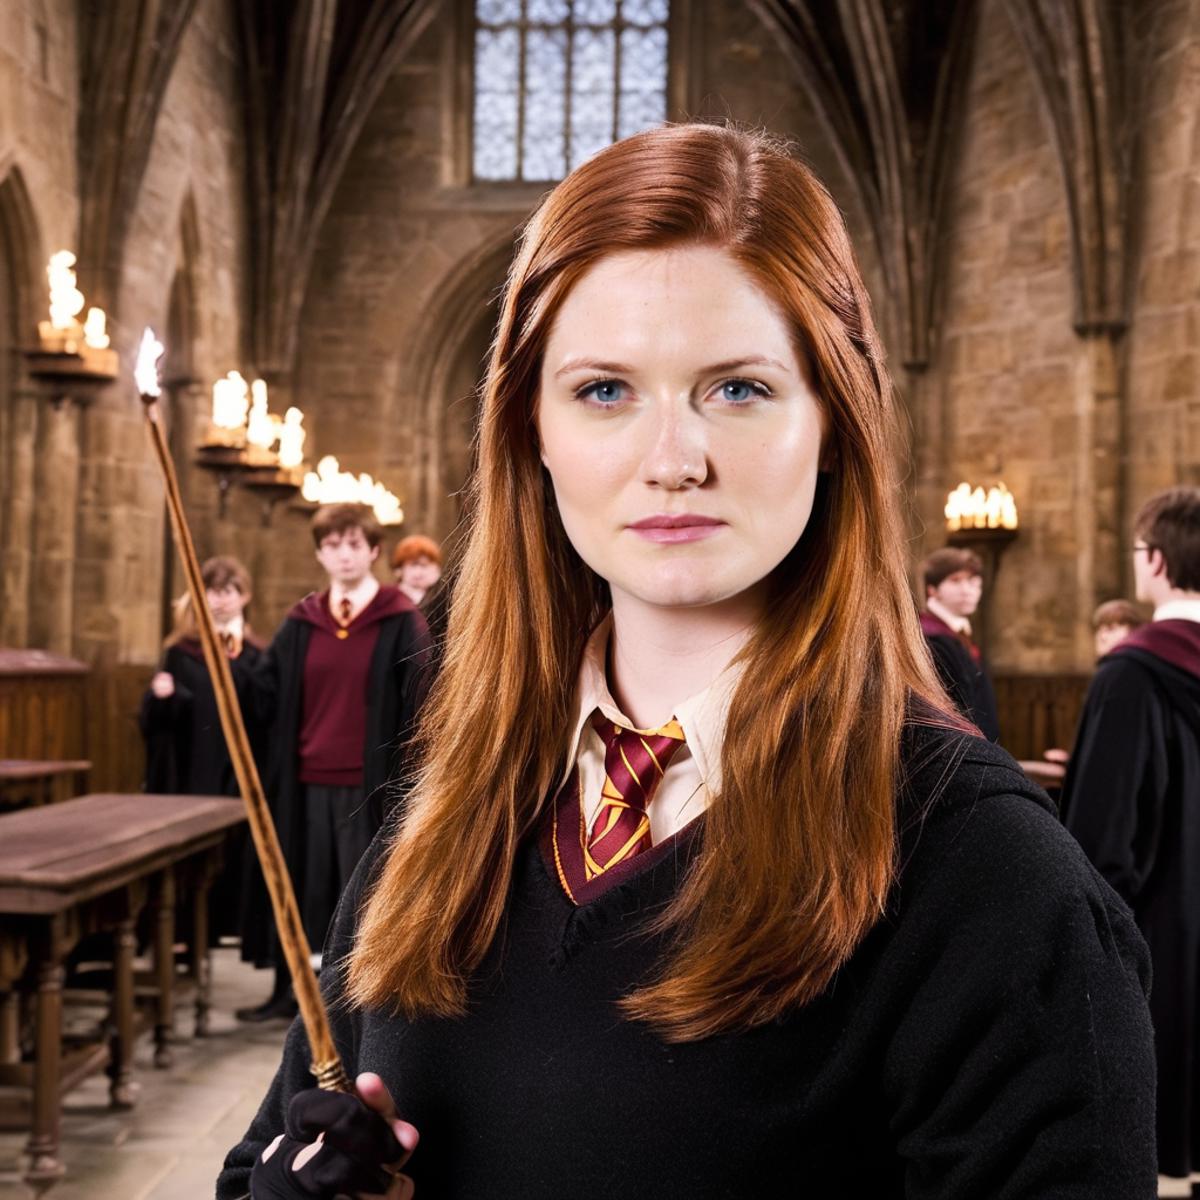 A young woman with red hair and a Gryffindor scarf holding a wand.